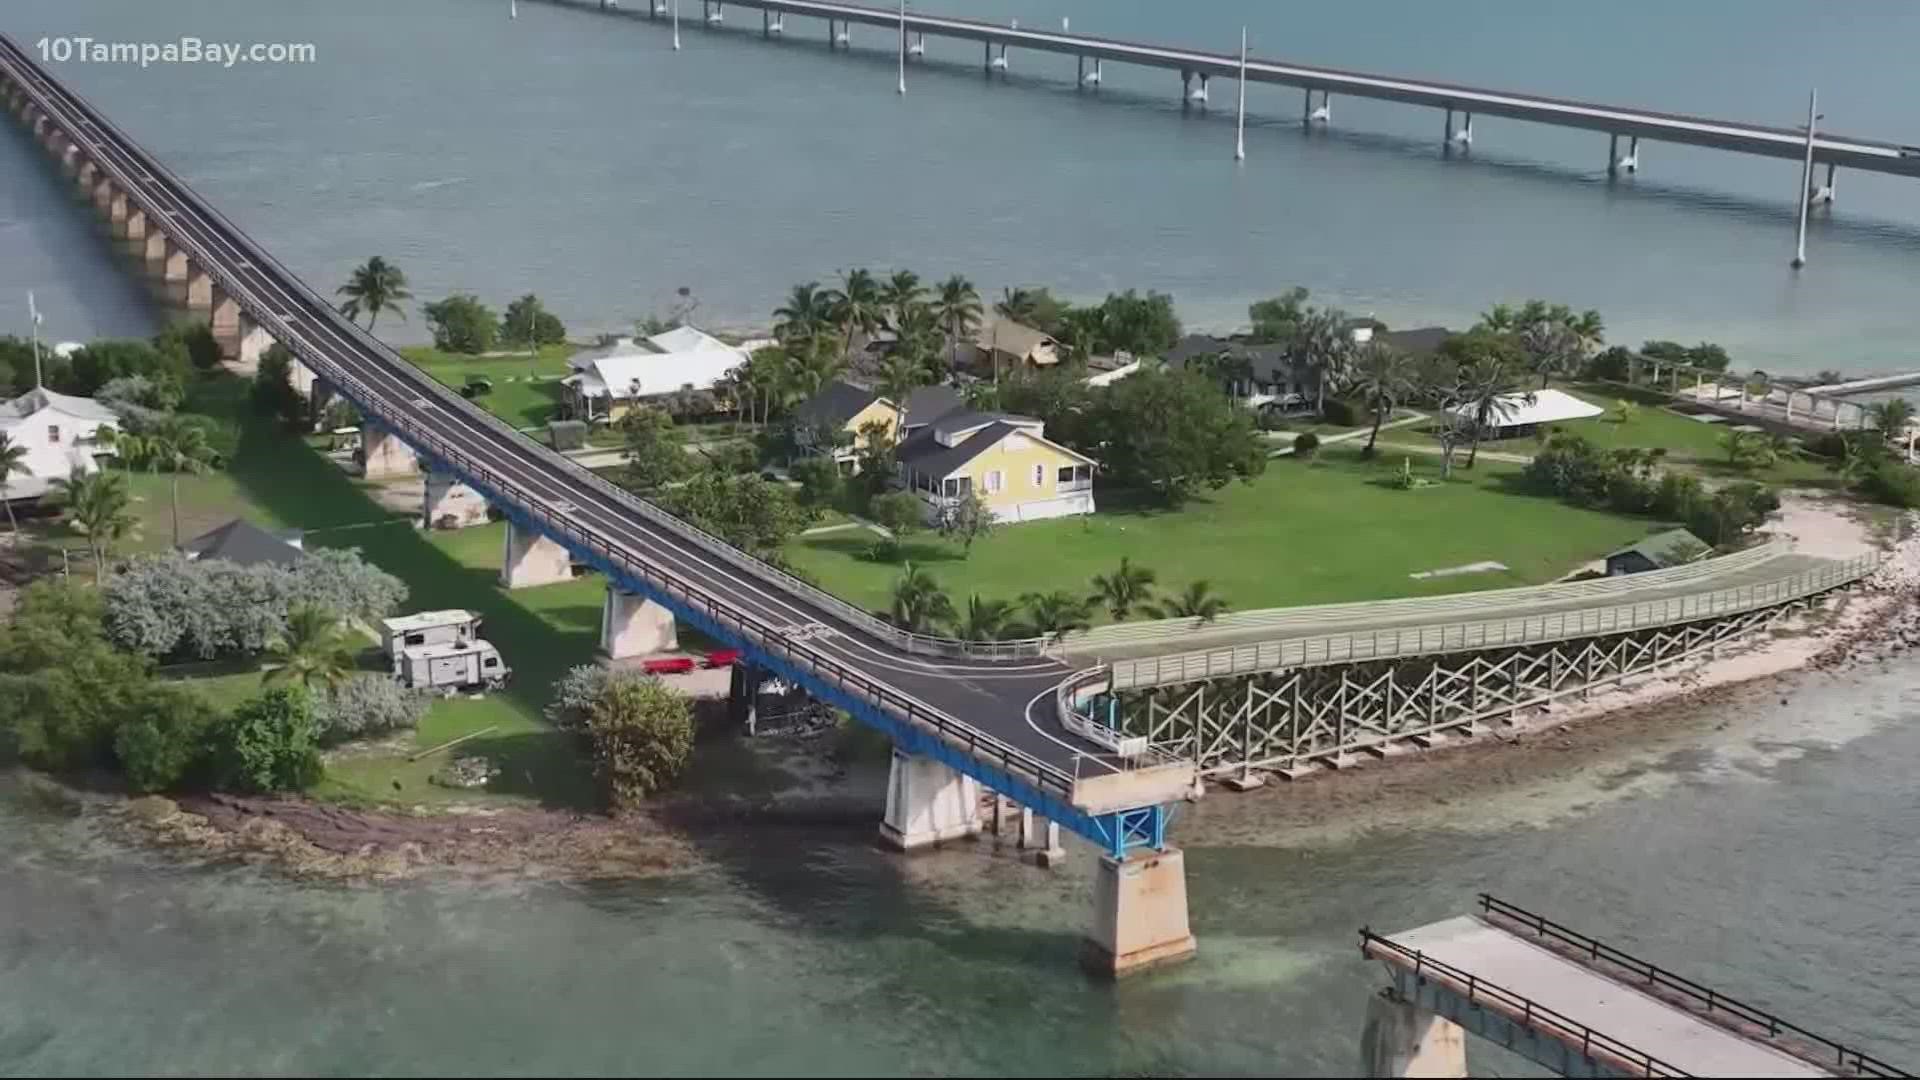 Nicknamed “Old Seven,” the iconic bridge had an integral role in Florida history.